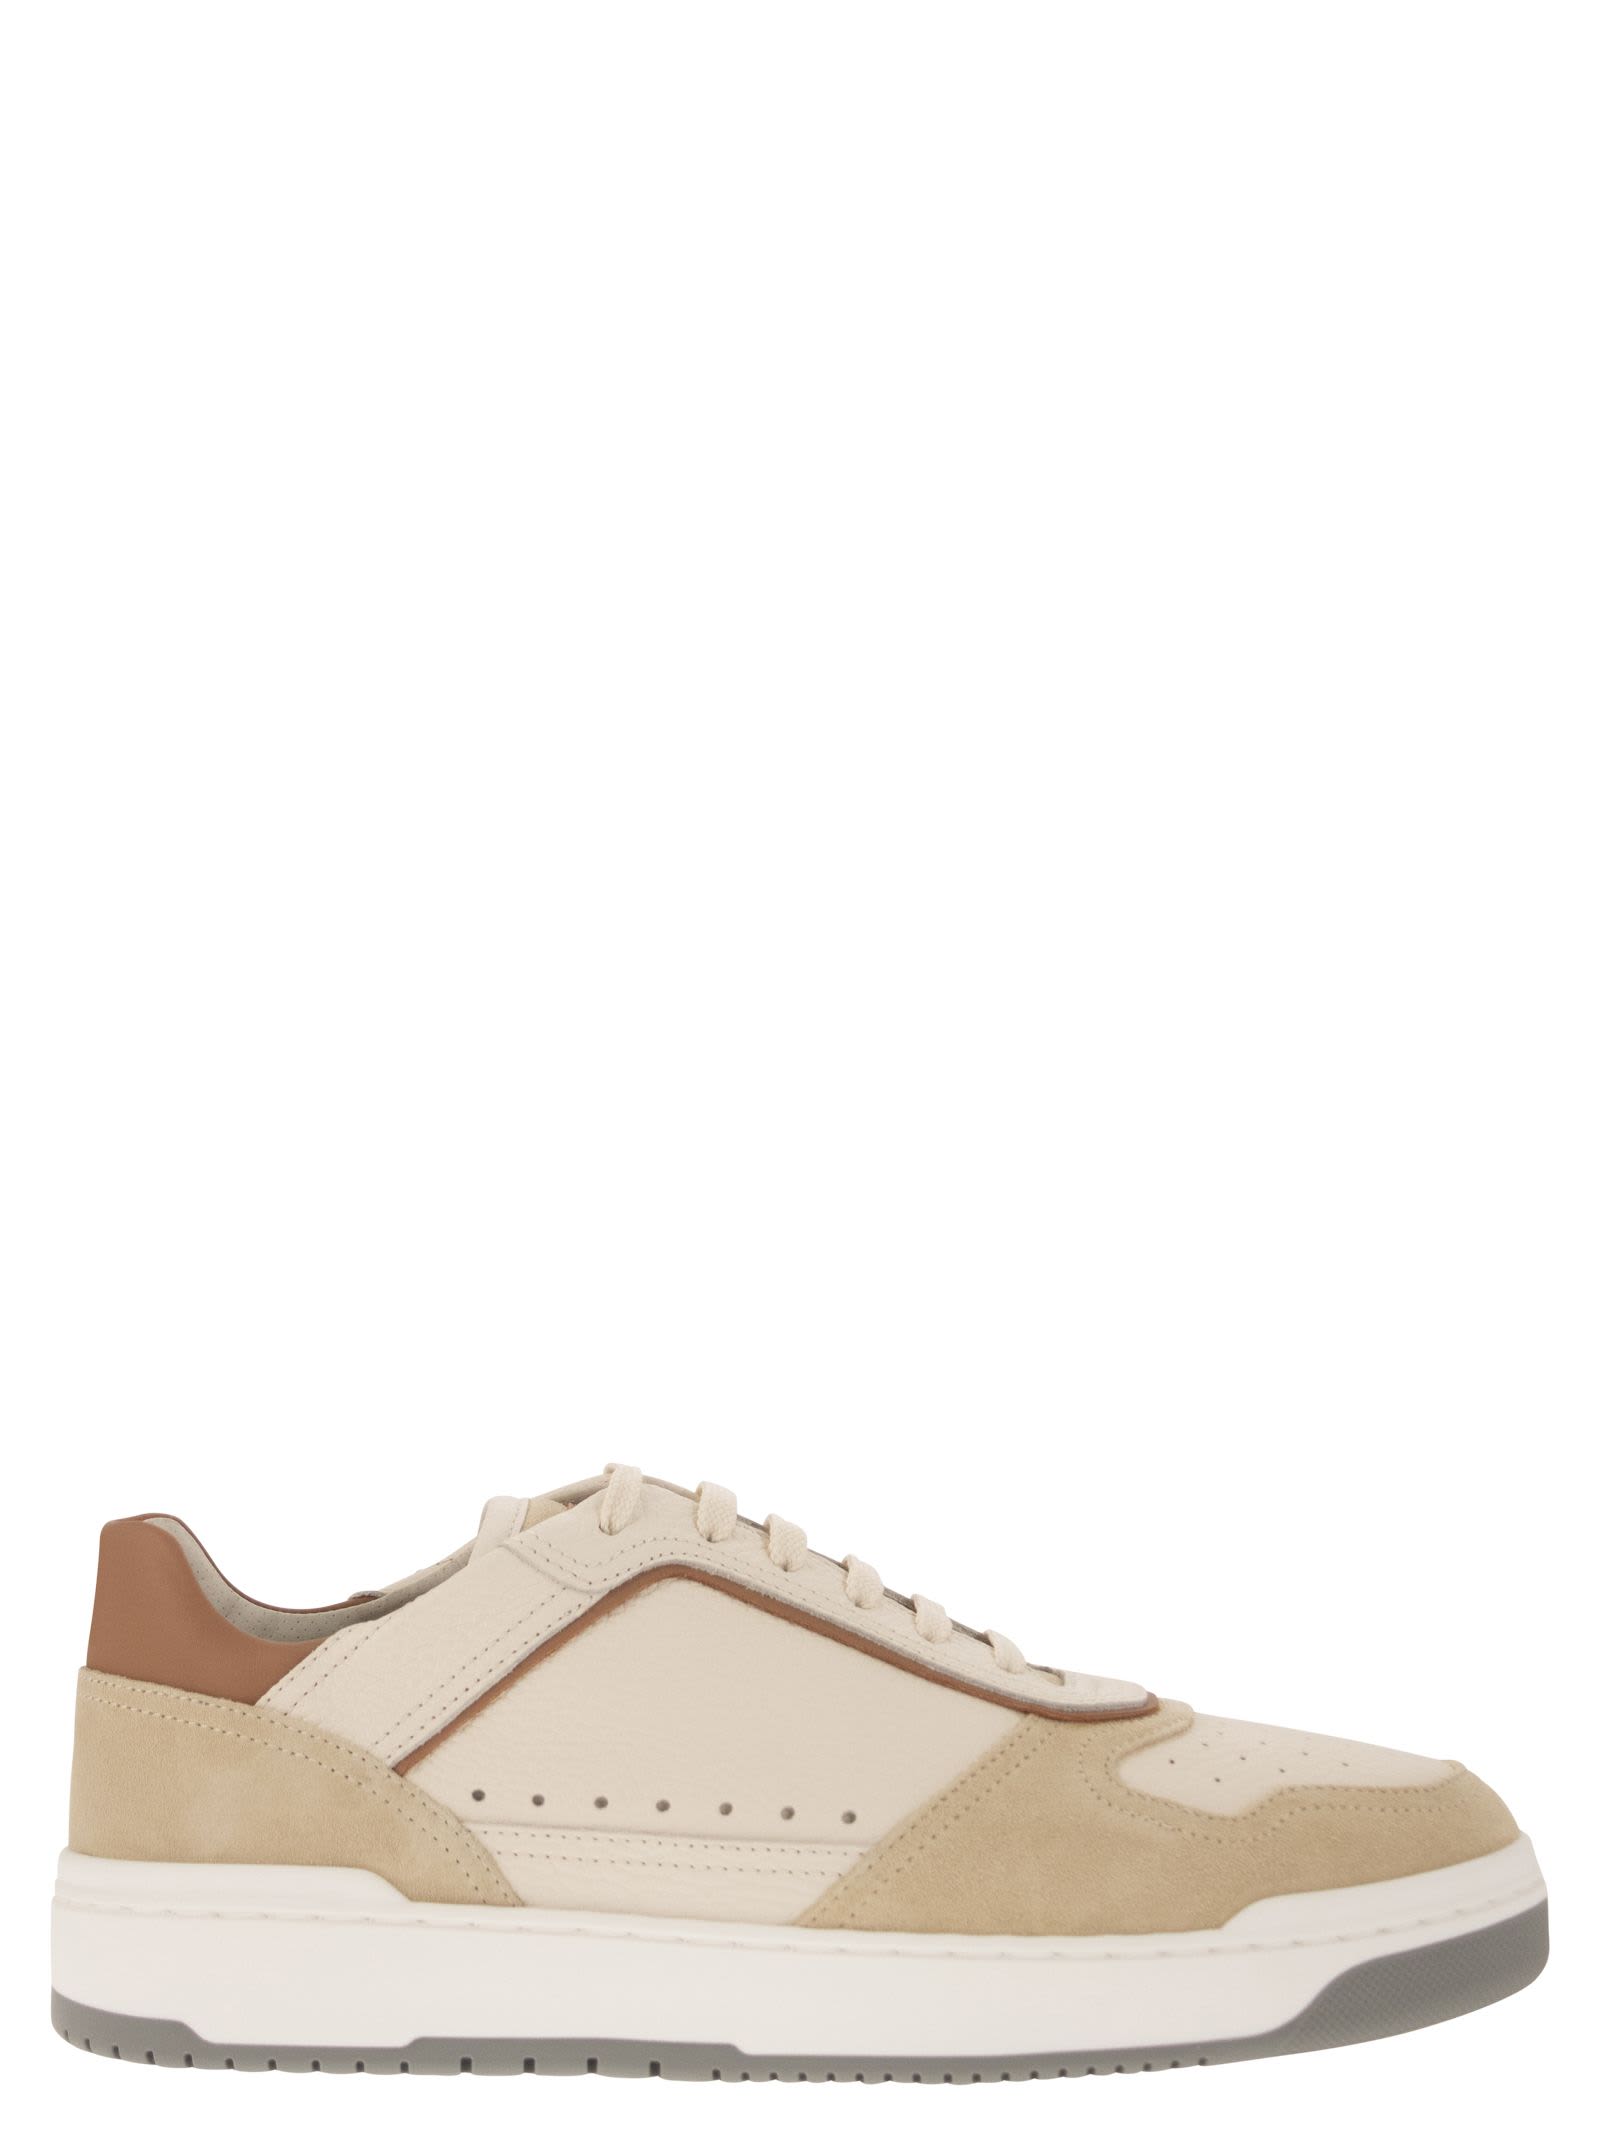 BRUNELLO CUCINELLI BASKET TRAINERS IN GRAINED CALFSKIN AND WASHED SUEDE